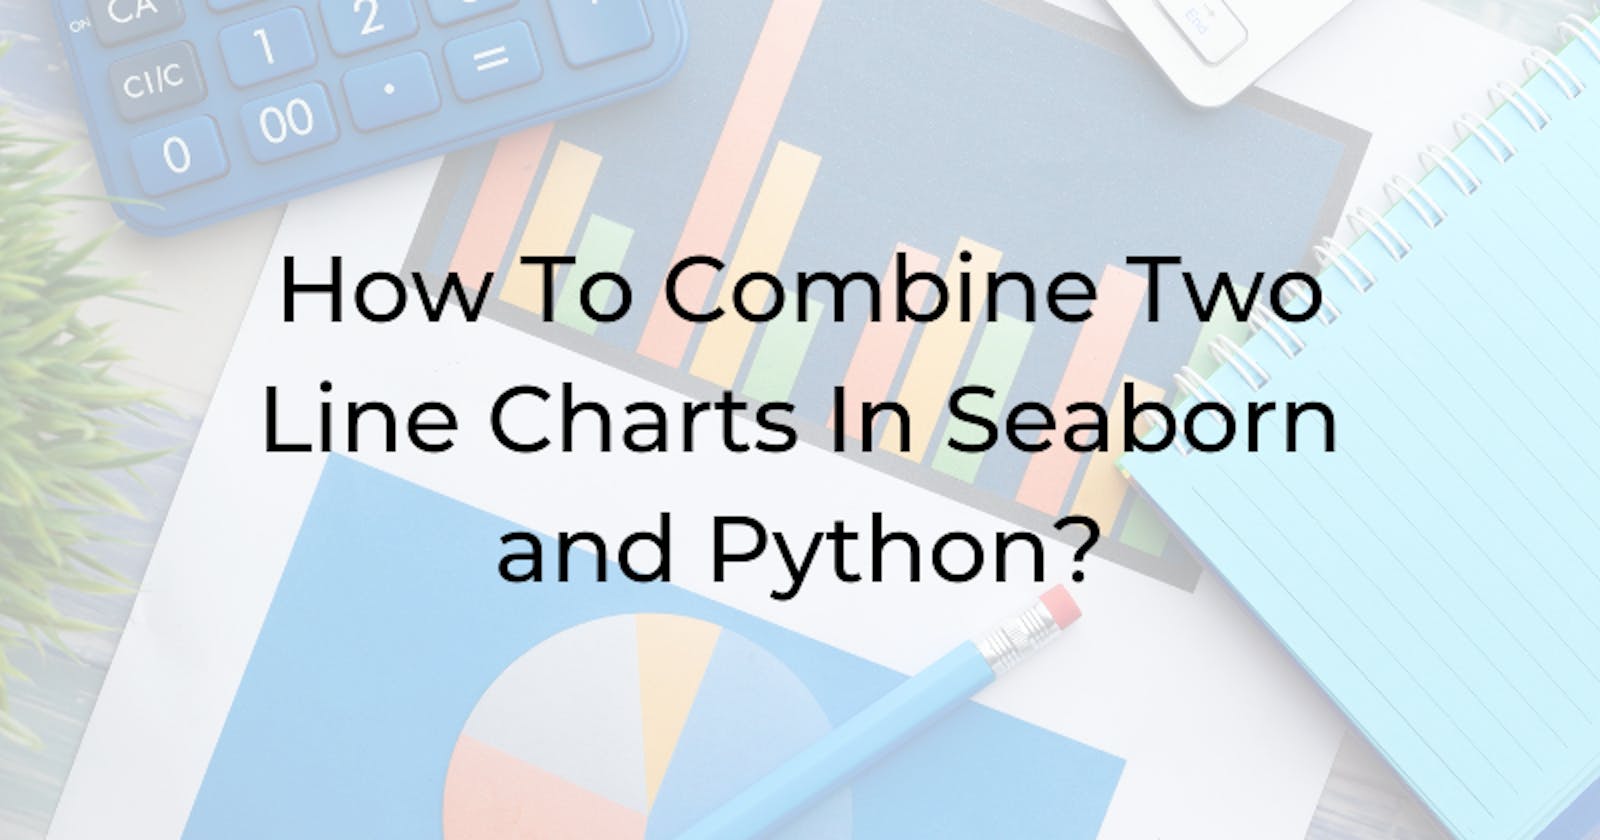 How To Combine Two Line Charts In Seaborn and Python?